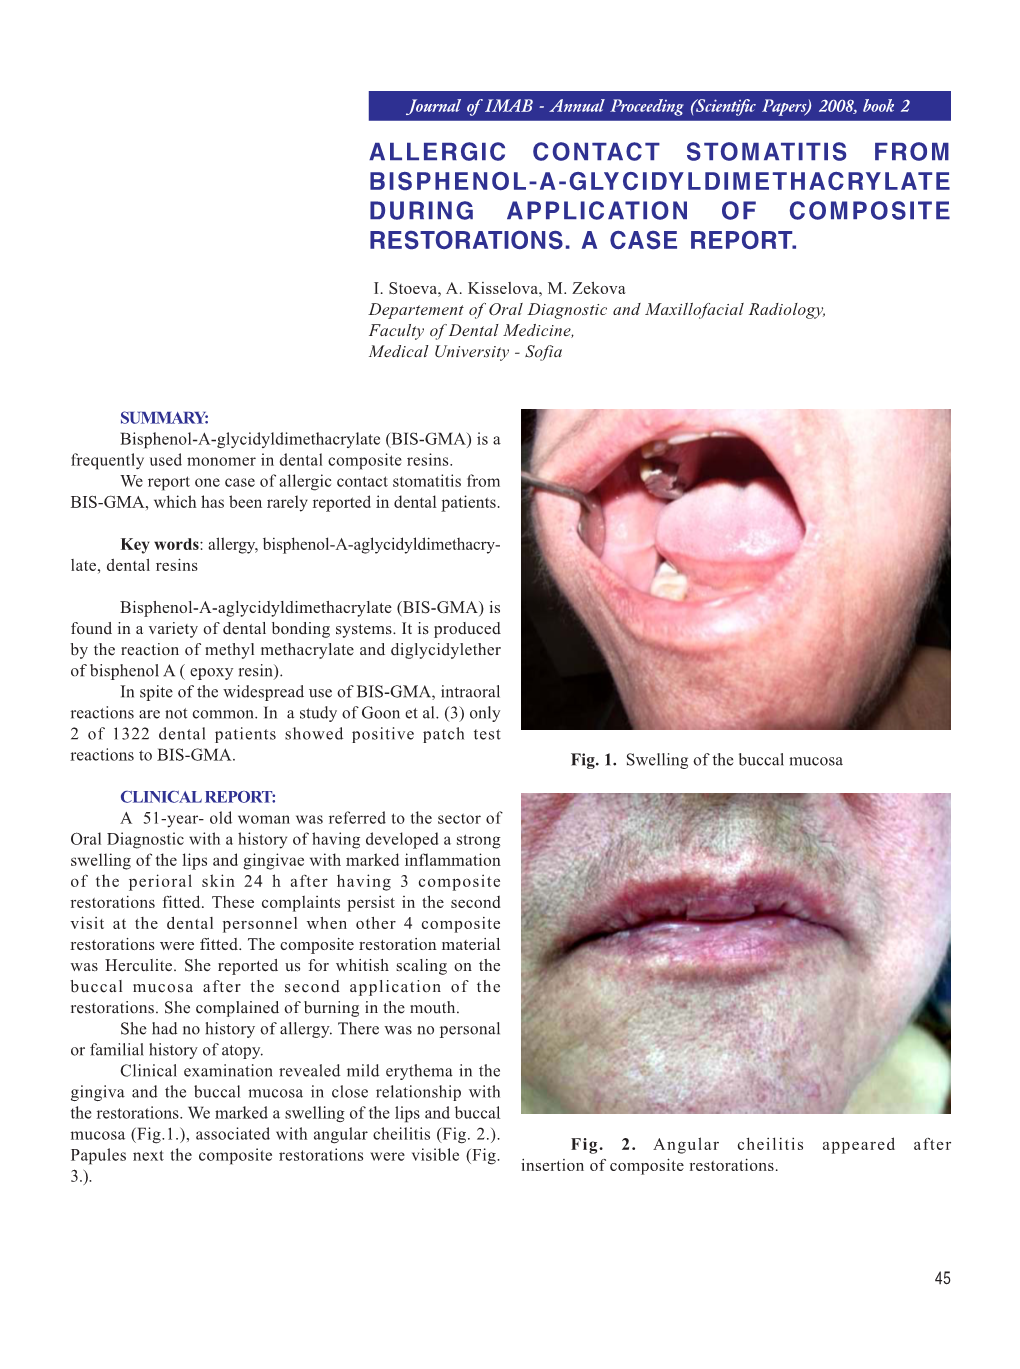 Allergic Contact Stomatitis from Bisphenol-A-Glycidyldimethacrylate During Application of Composite Restorations